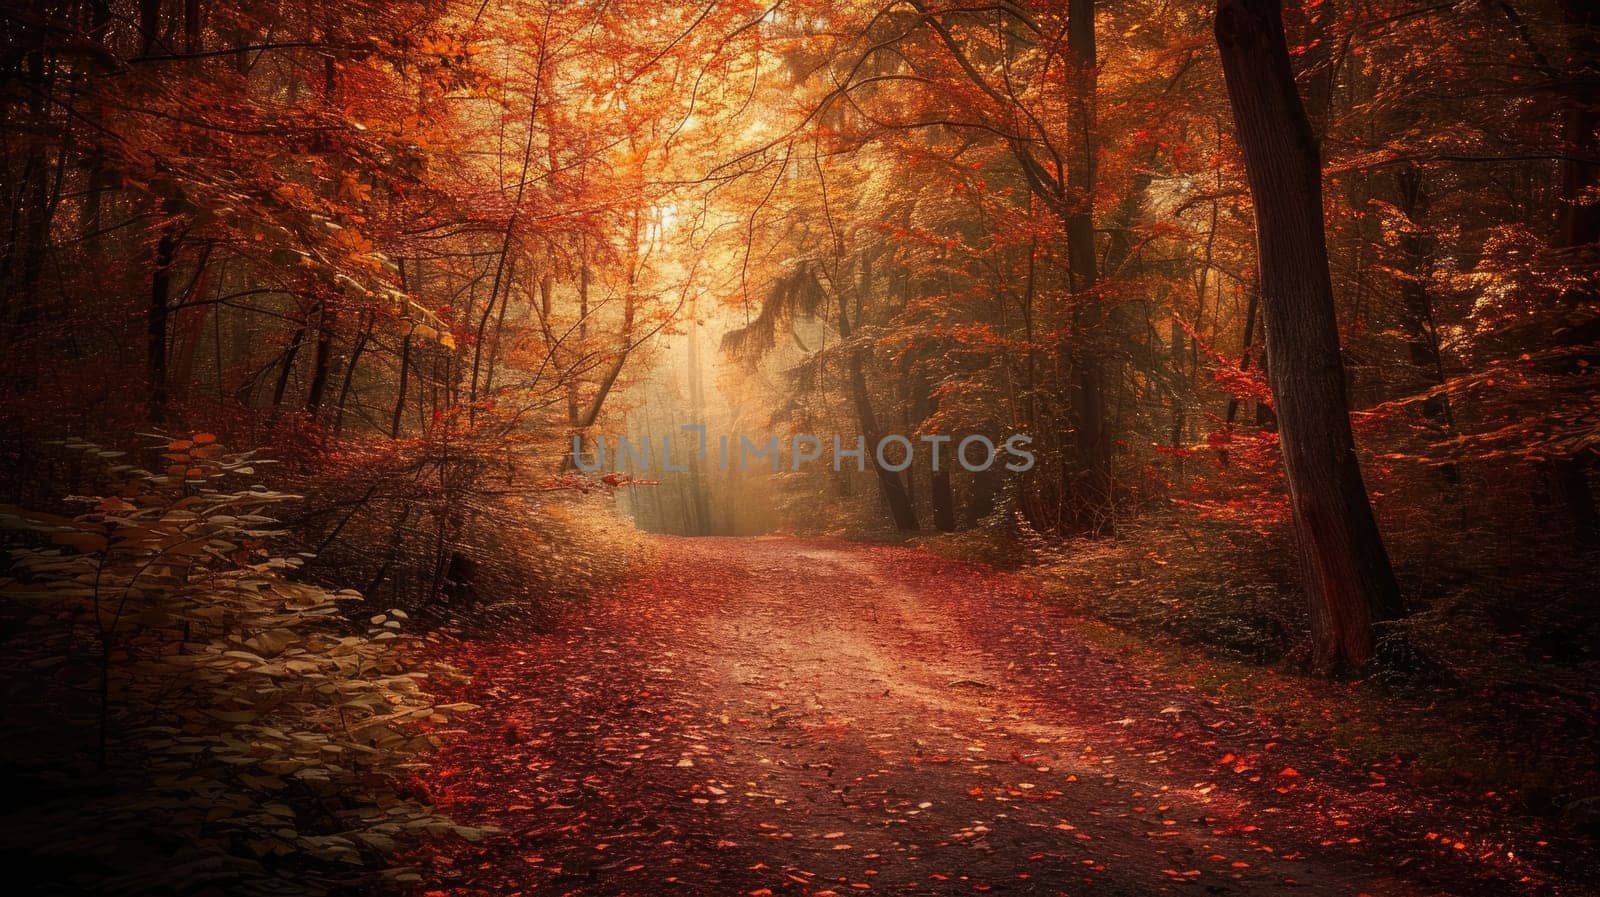 An enchanted forest in autumn, filled with golden leaves. Resplendent. by biancoblue